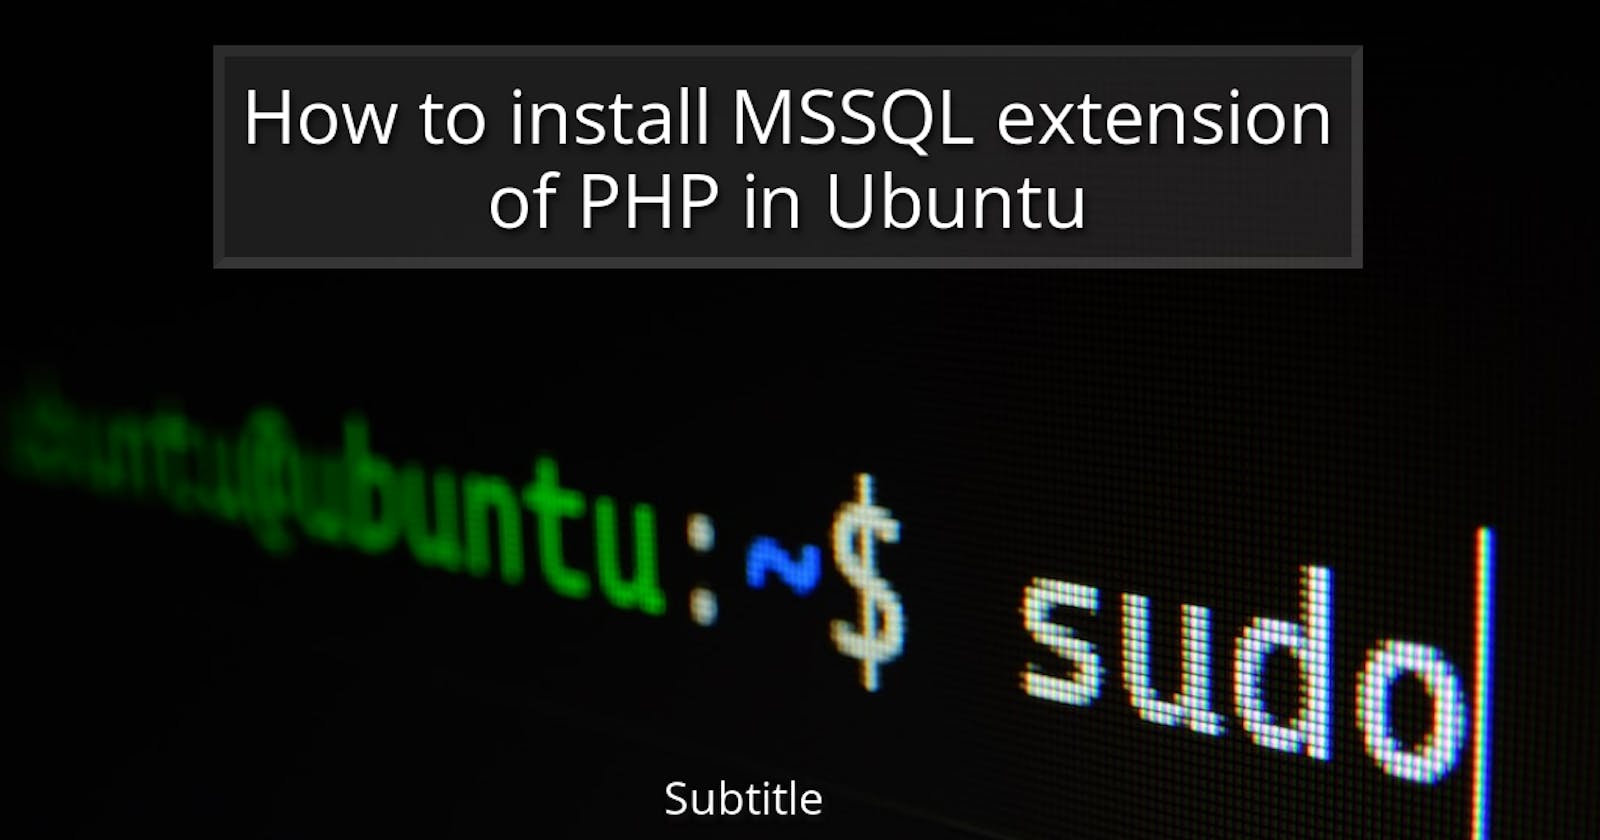 How to install MSSQL extension of PHP in Ubuntu